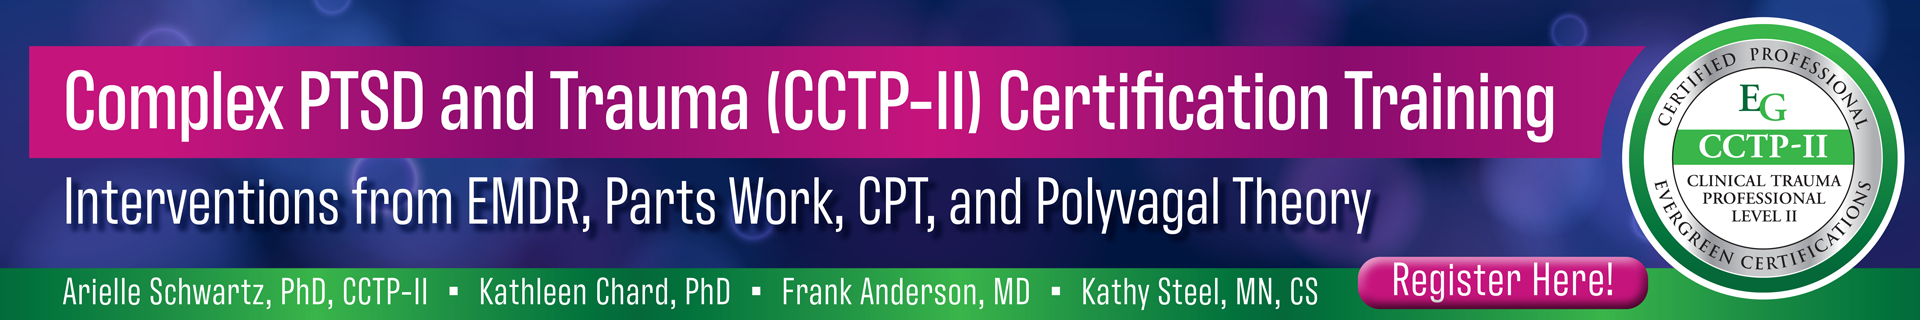 Complex PTSD and Trauma (CCTP-II) Certification Training: Interventions from EMDR, Parts Work, CPT, and Polyvagal Theory